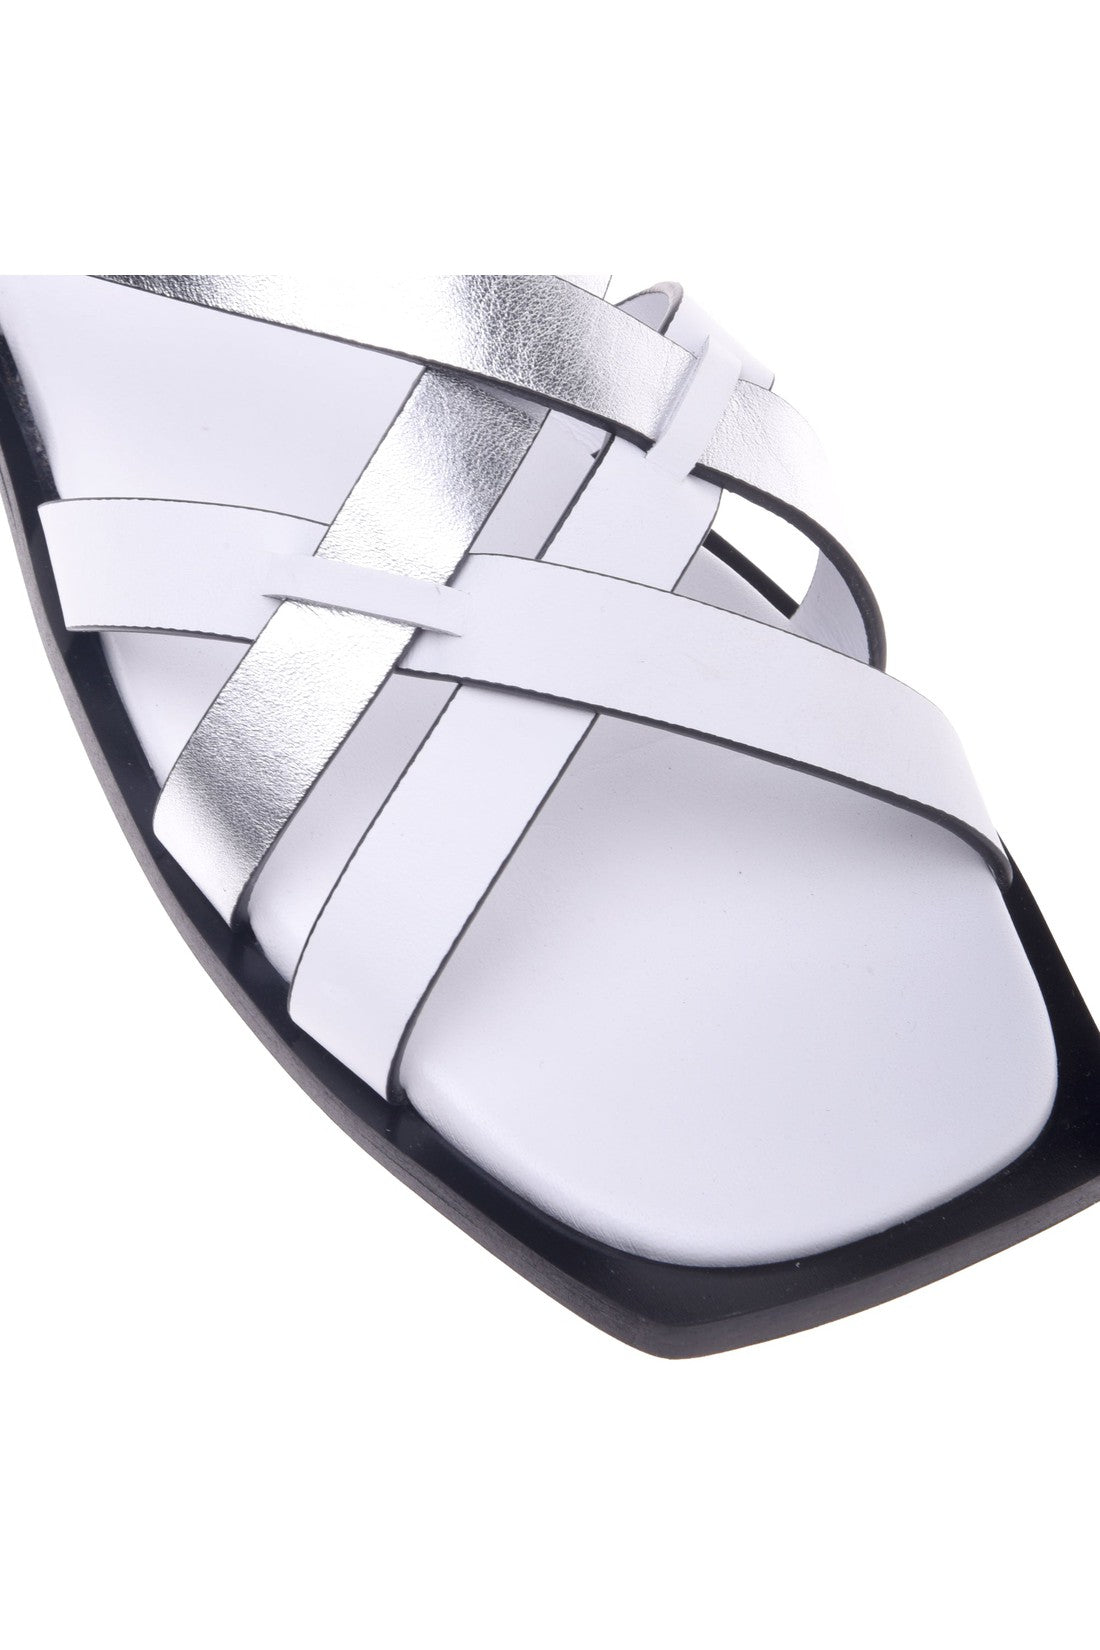 BALDININI-OUTLET-SALE-Sandal-in-white-and-silver-calfskin-Sandalen-ARCHIVE-COLLECTION-4.jpg